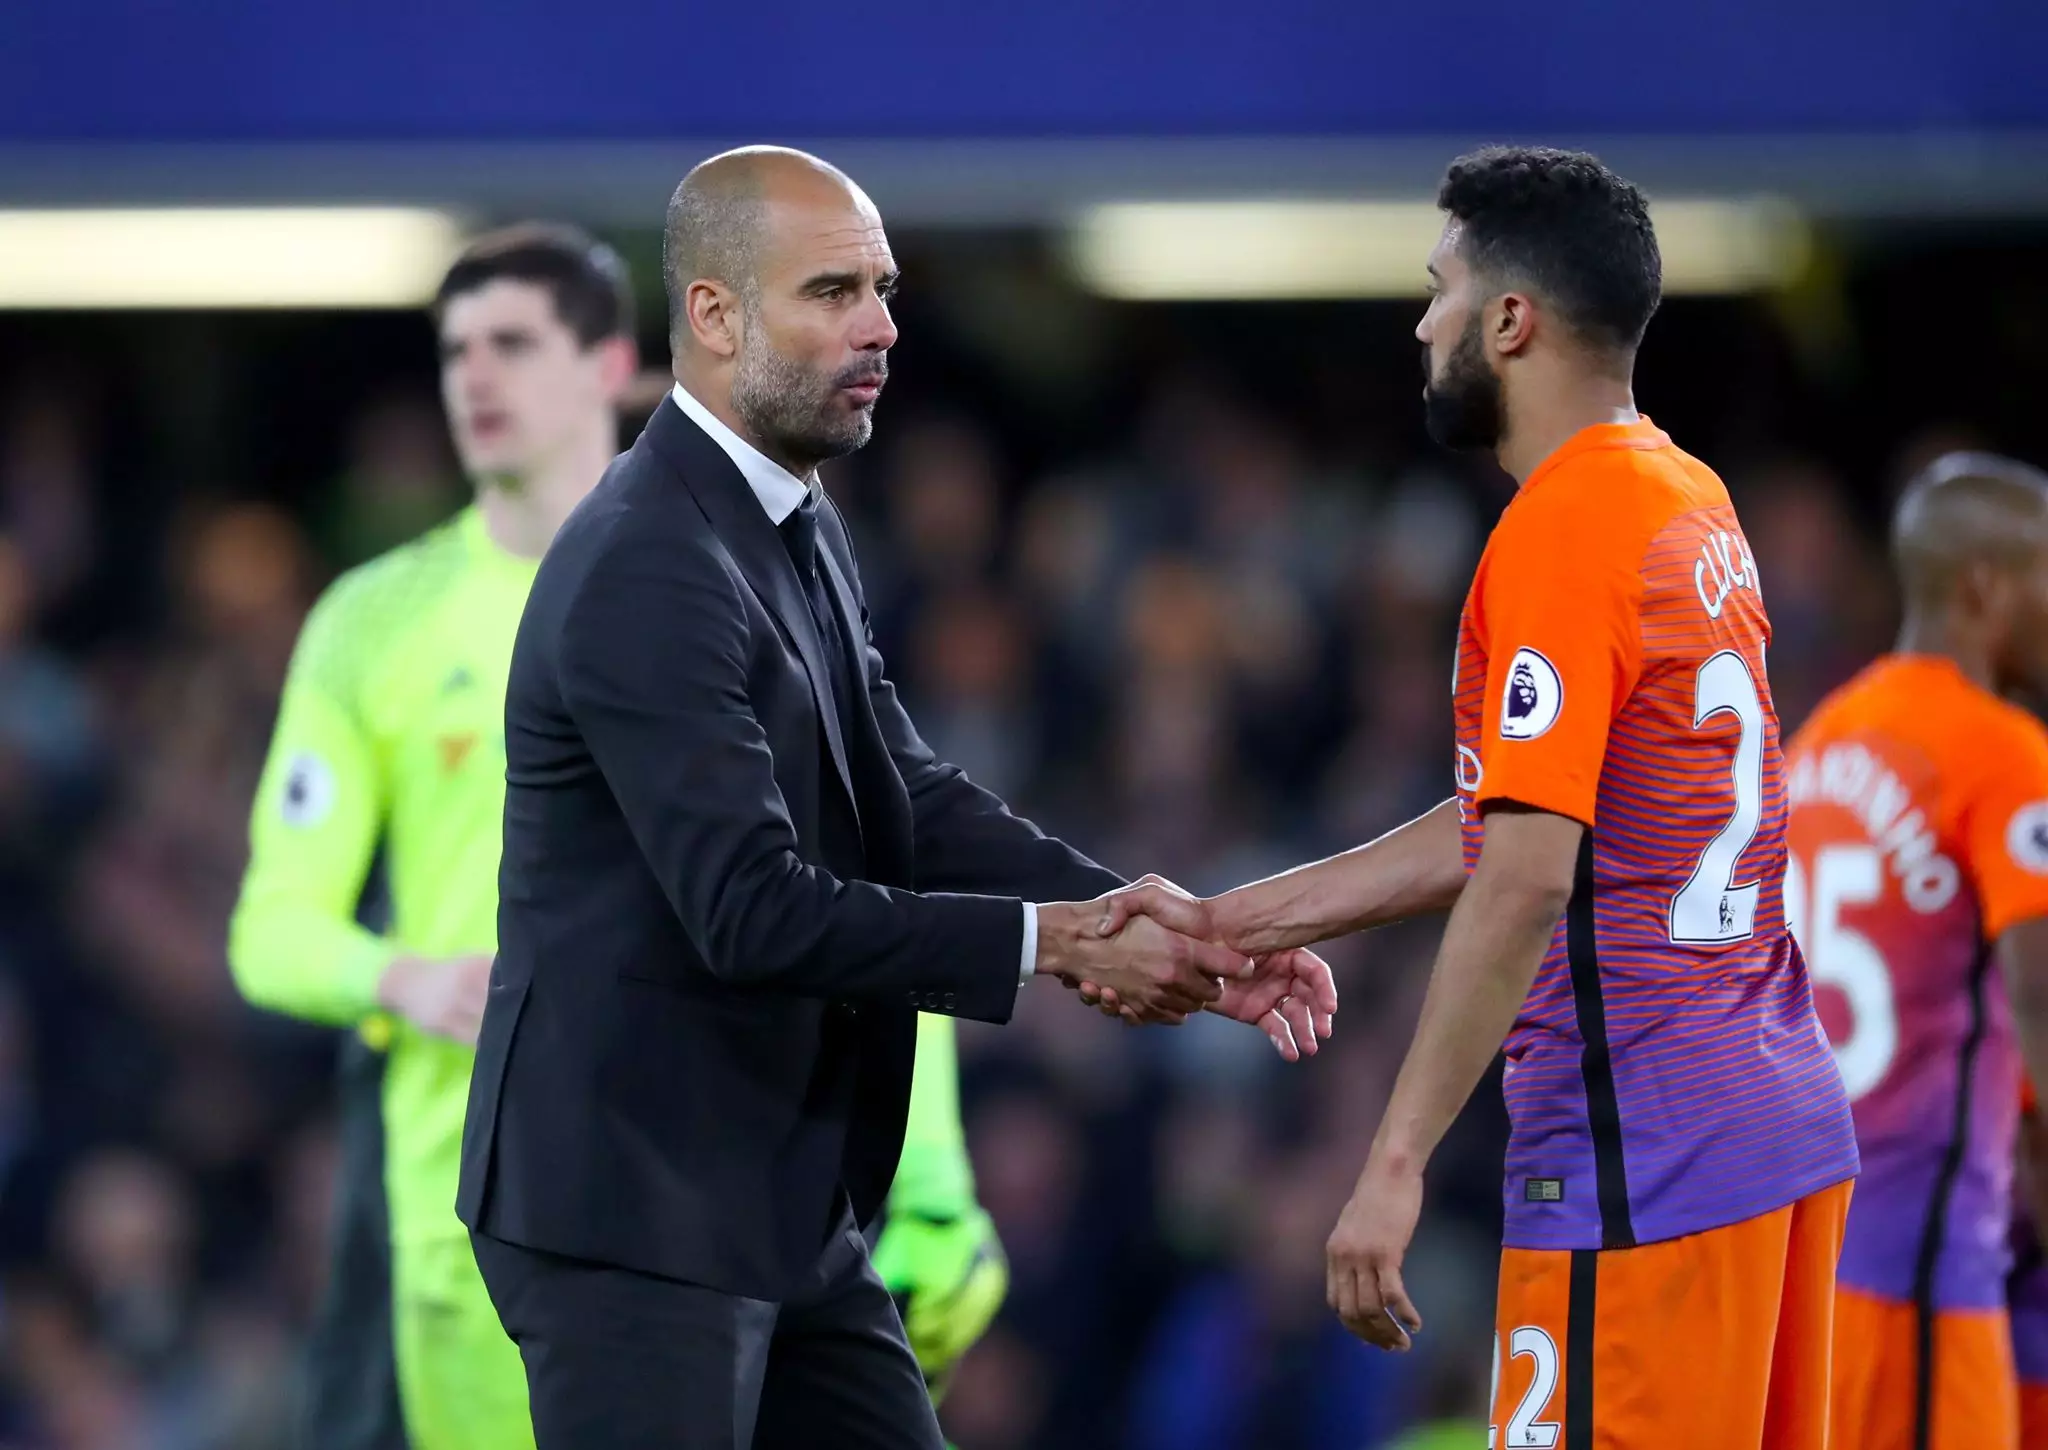 Guardiola shakes hands with Clichy. Image: PA